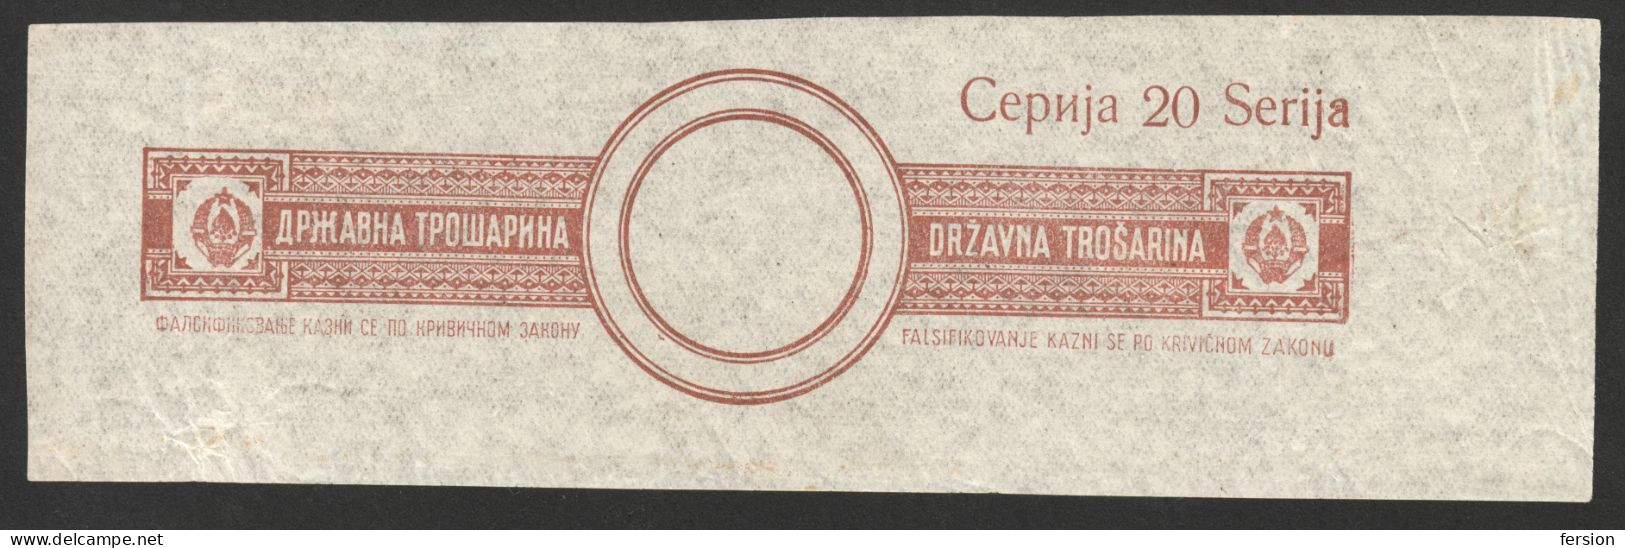 Yugoslavia 1945 EXCISE Revenue Fiscal Luxury Tax CONTROL BAND Stamp / Stripe Seal - Ser. No. 20 - Coat Of Arms - Service